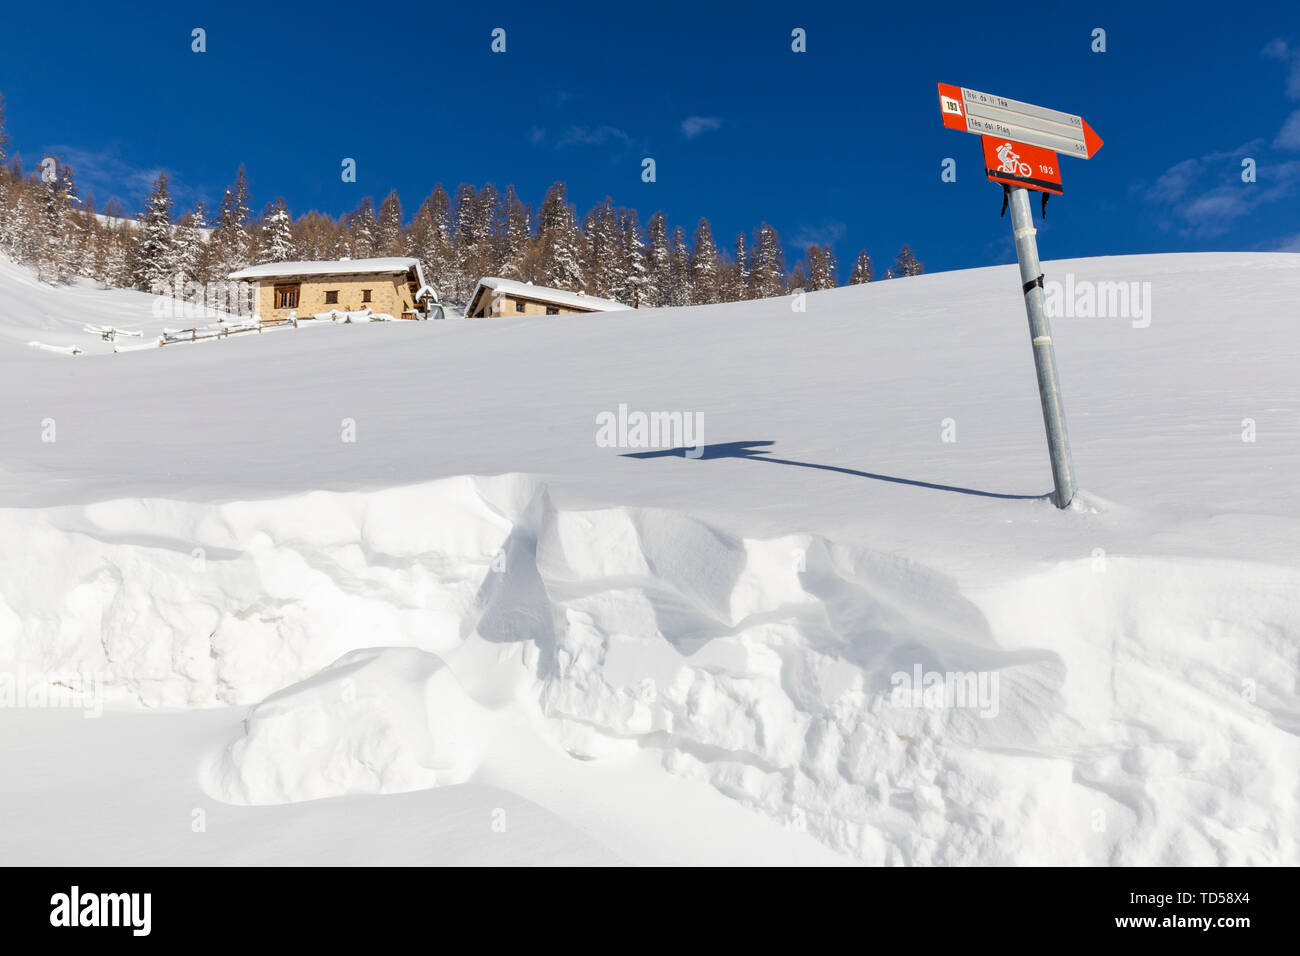 Traditional huts with trekking signal in winter, Livigno, Valtellina, Lombardy, Italy, Europe Stock Photo